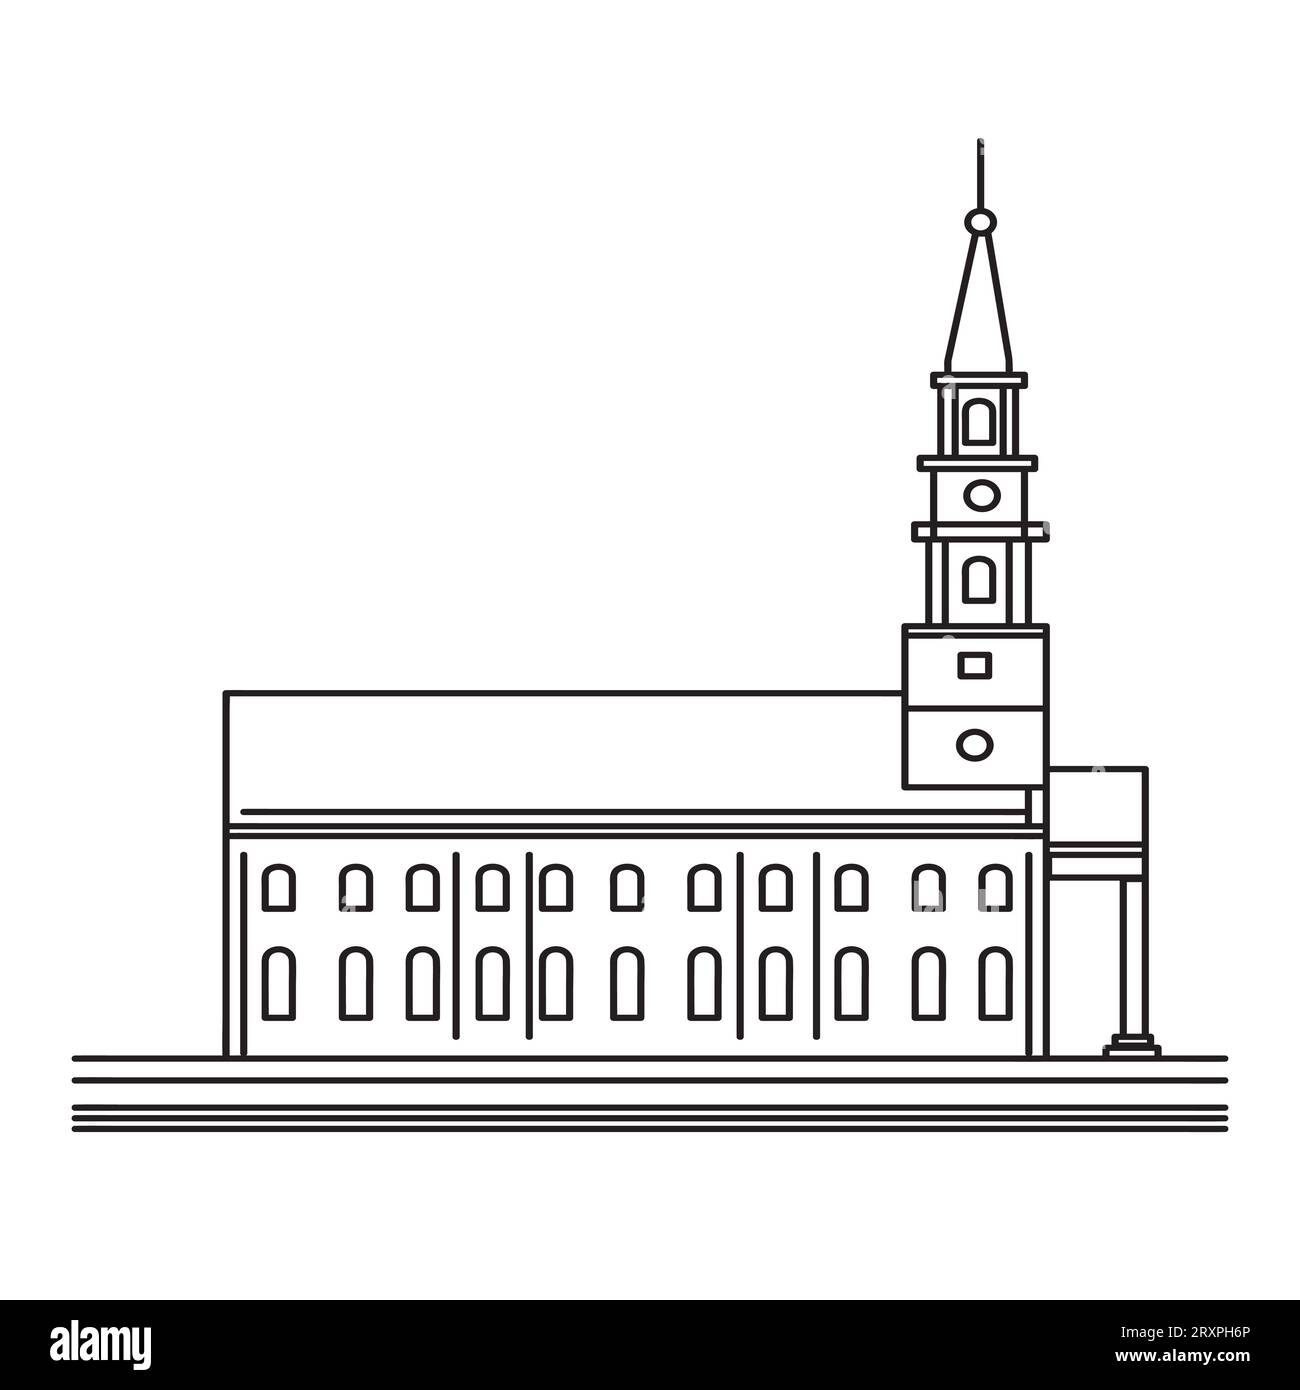 Mono line illustration of a Church with steeple viewed from side done in monoline line art black and white style. Stock Photo